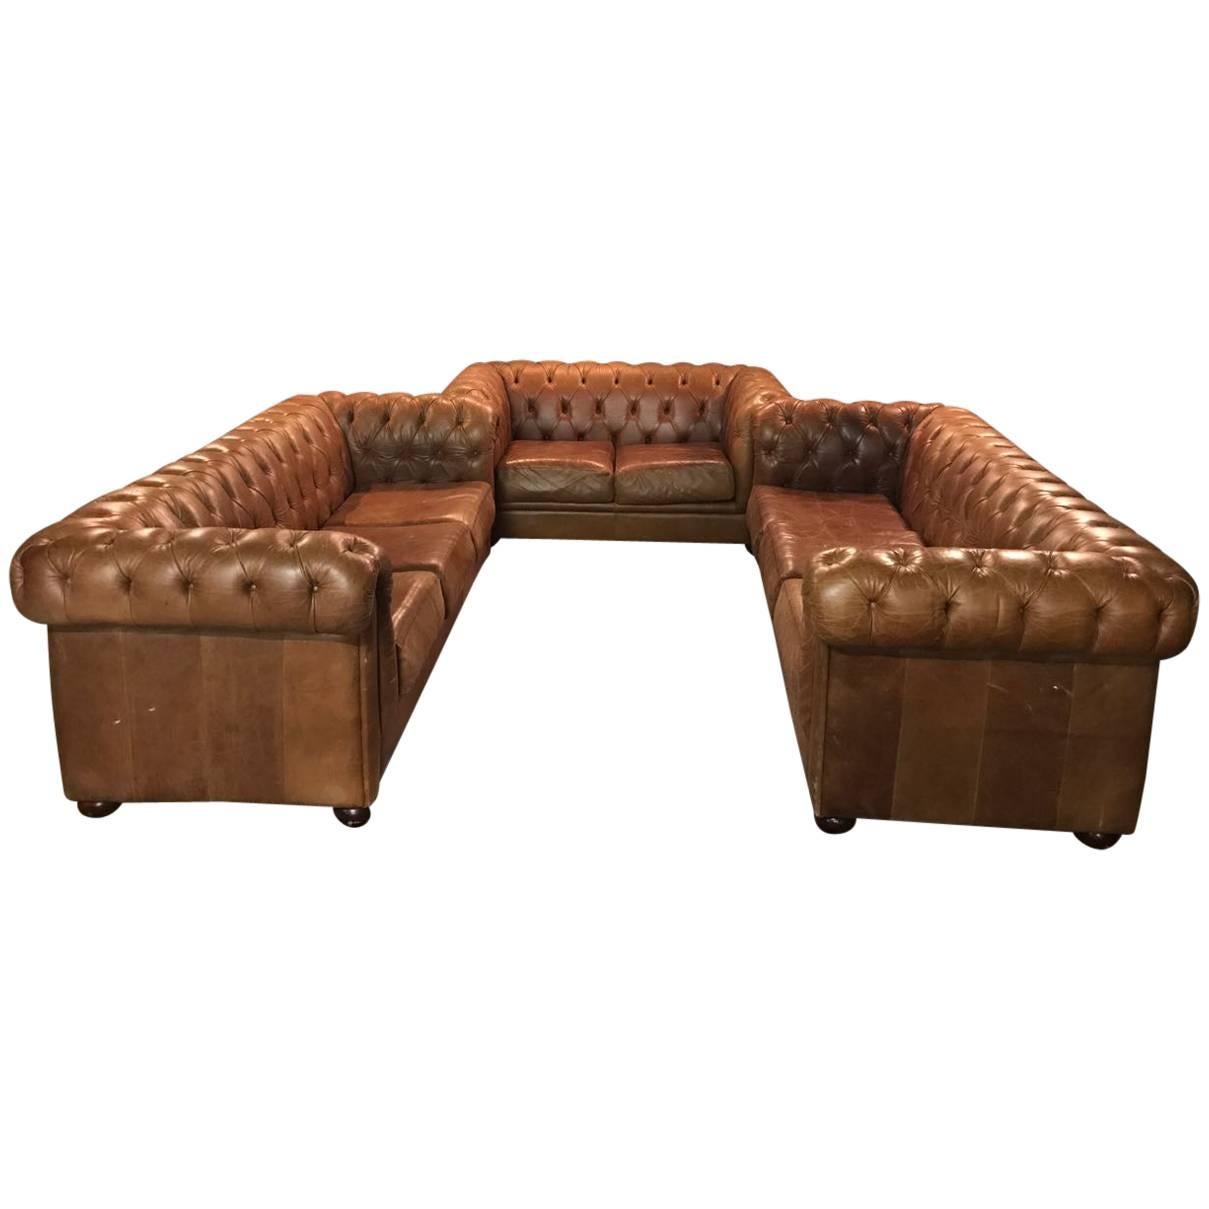 Chesterfield Seating Set in Vintage Style, Genuine Leather Beautiful Patina